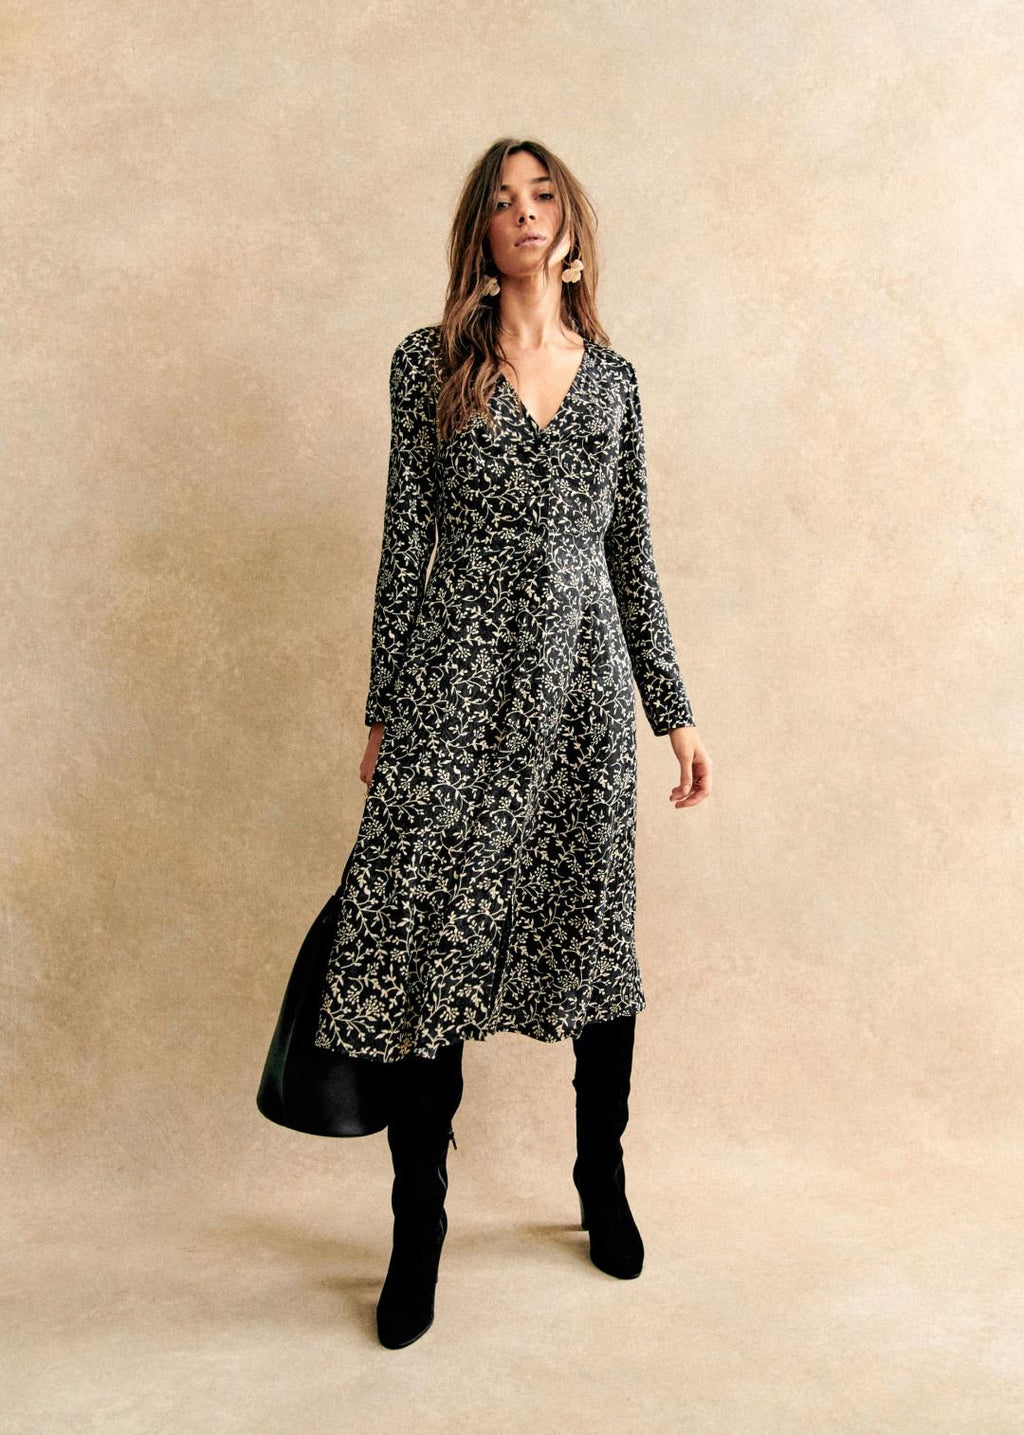 Elevate your style with the Dress Victoriana. This midi dress features long sleeves and a flattering v-neckline. Its waistline is slightly tailored for a slim look, while the front button closure adds a touch of sophistication. Dress to impress with this carefully crafted piece.